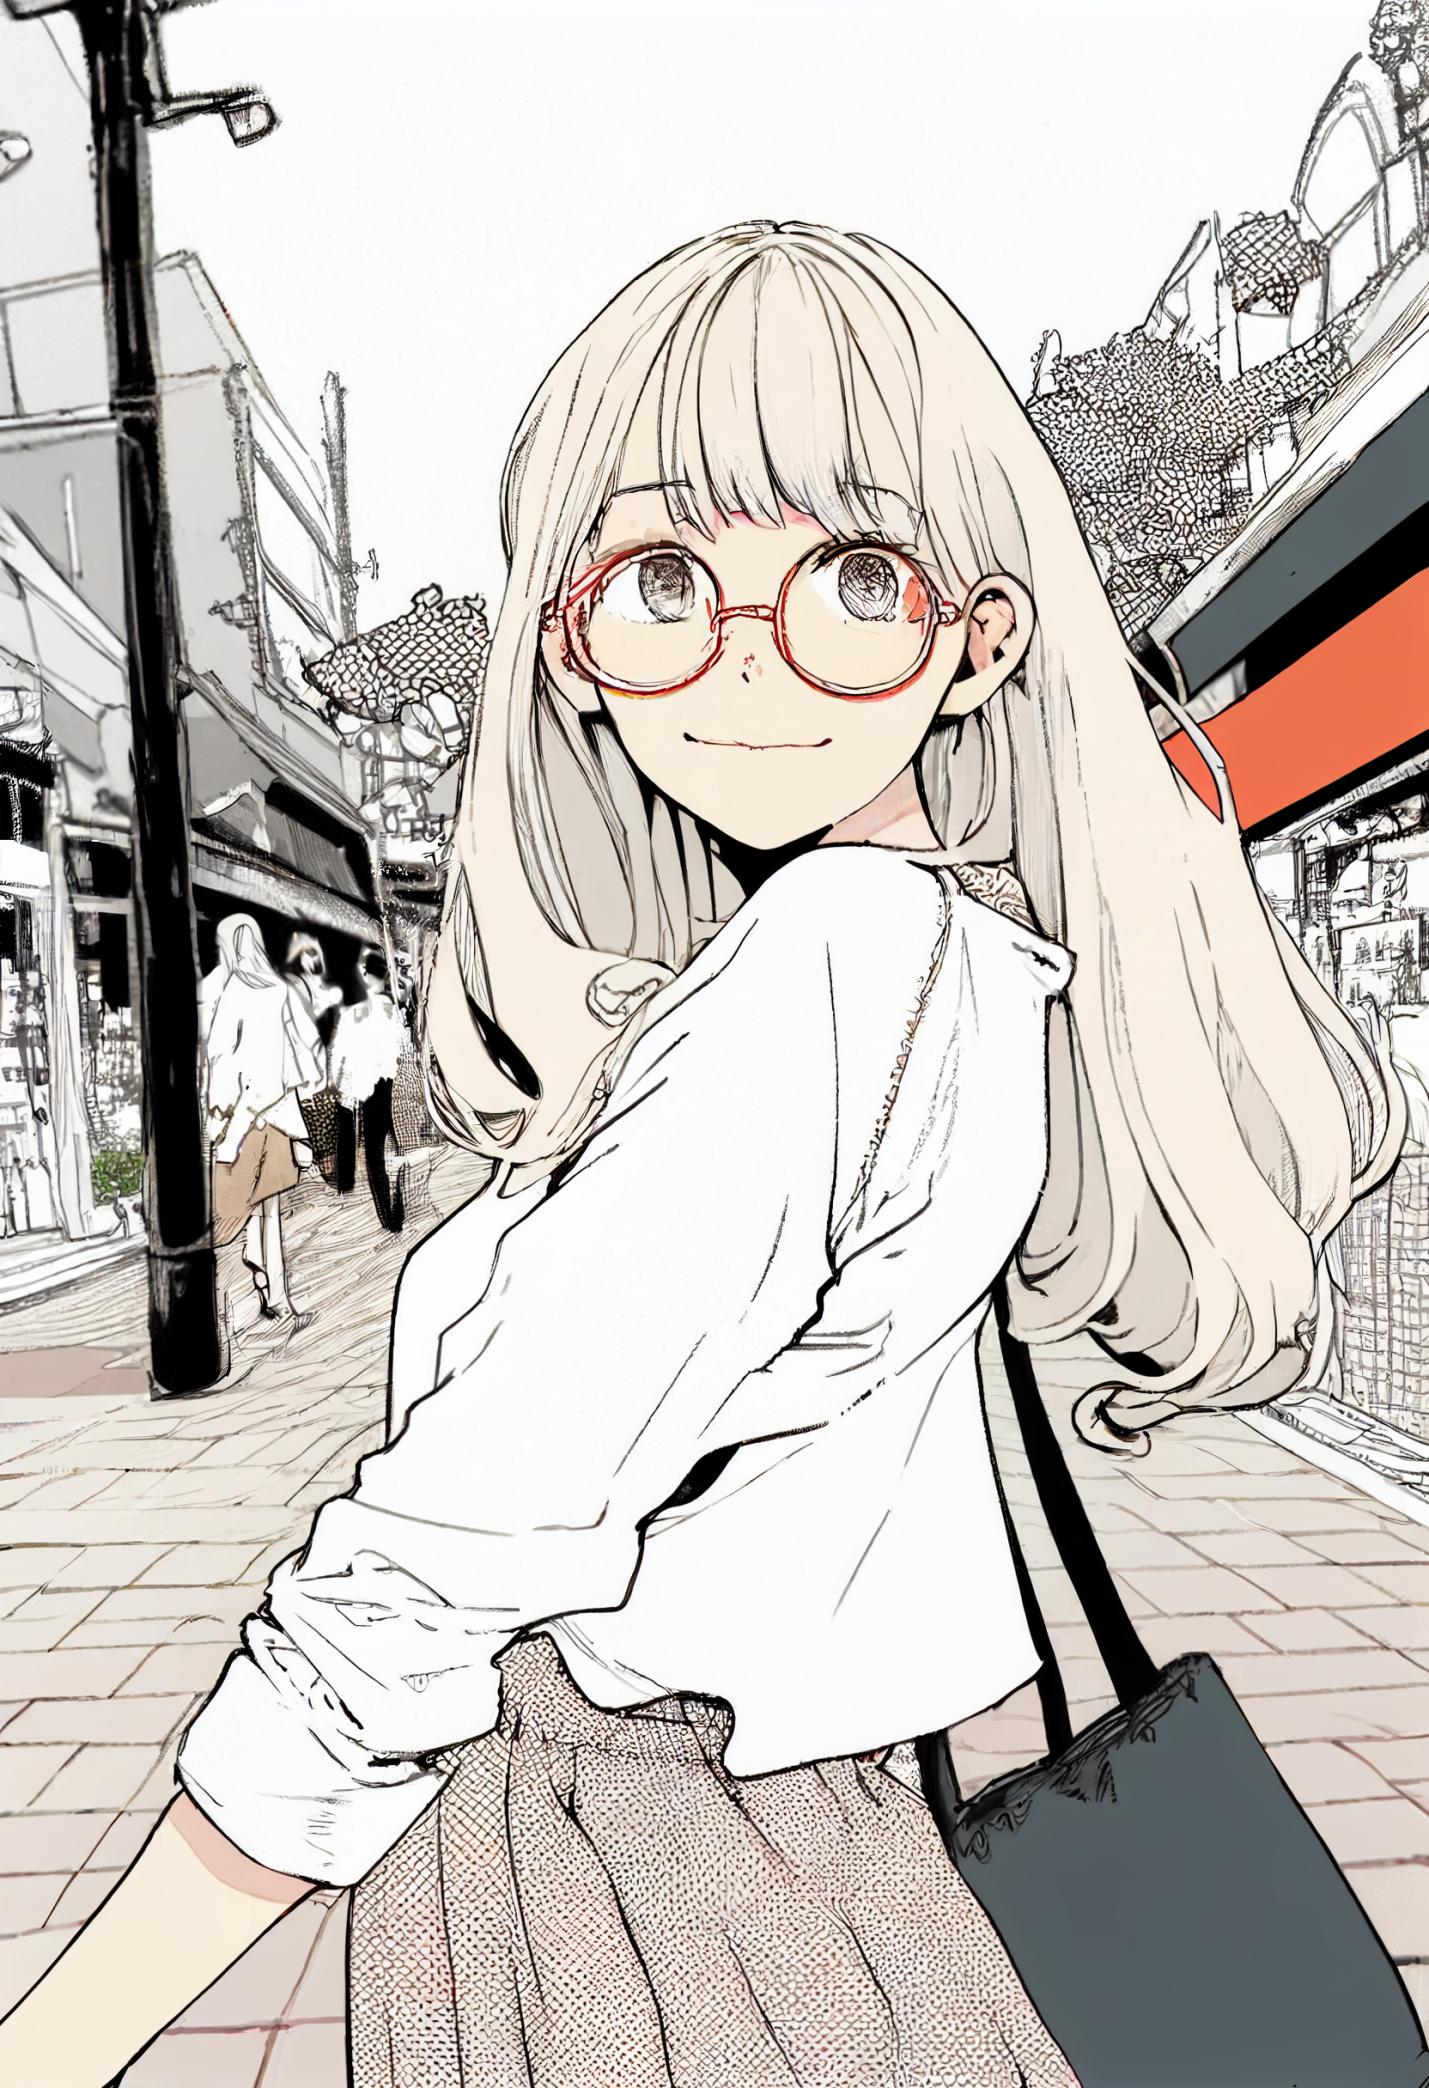 Bluewing_Beautiful_woman_by_Moto_Hagio_street_background_perspe_868aa794-cf37-45ef-95fa-70c57ff5d774.png